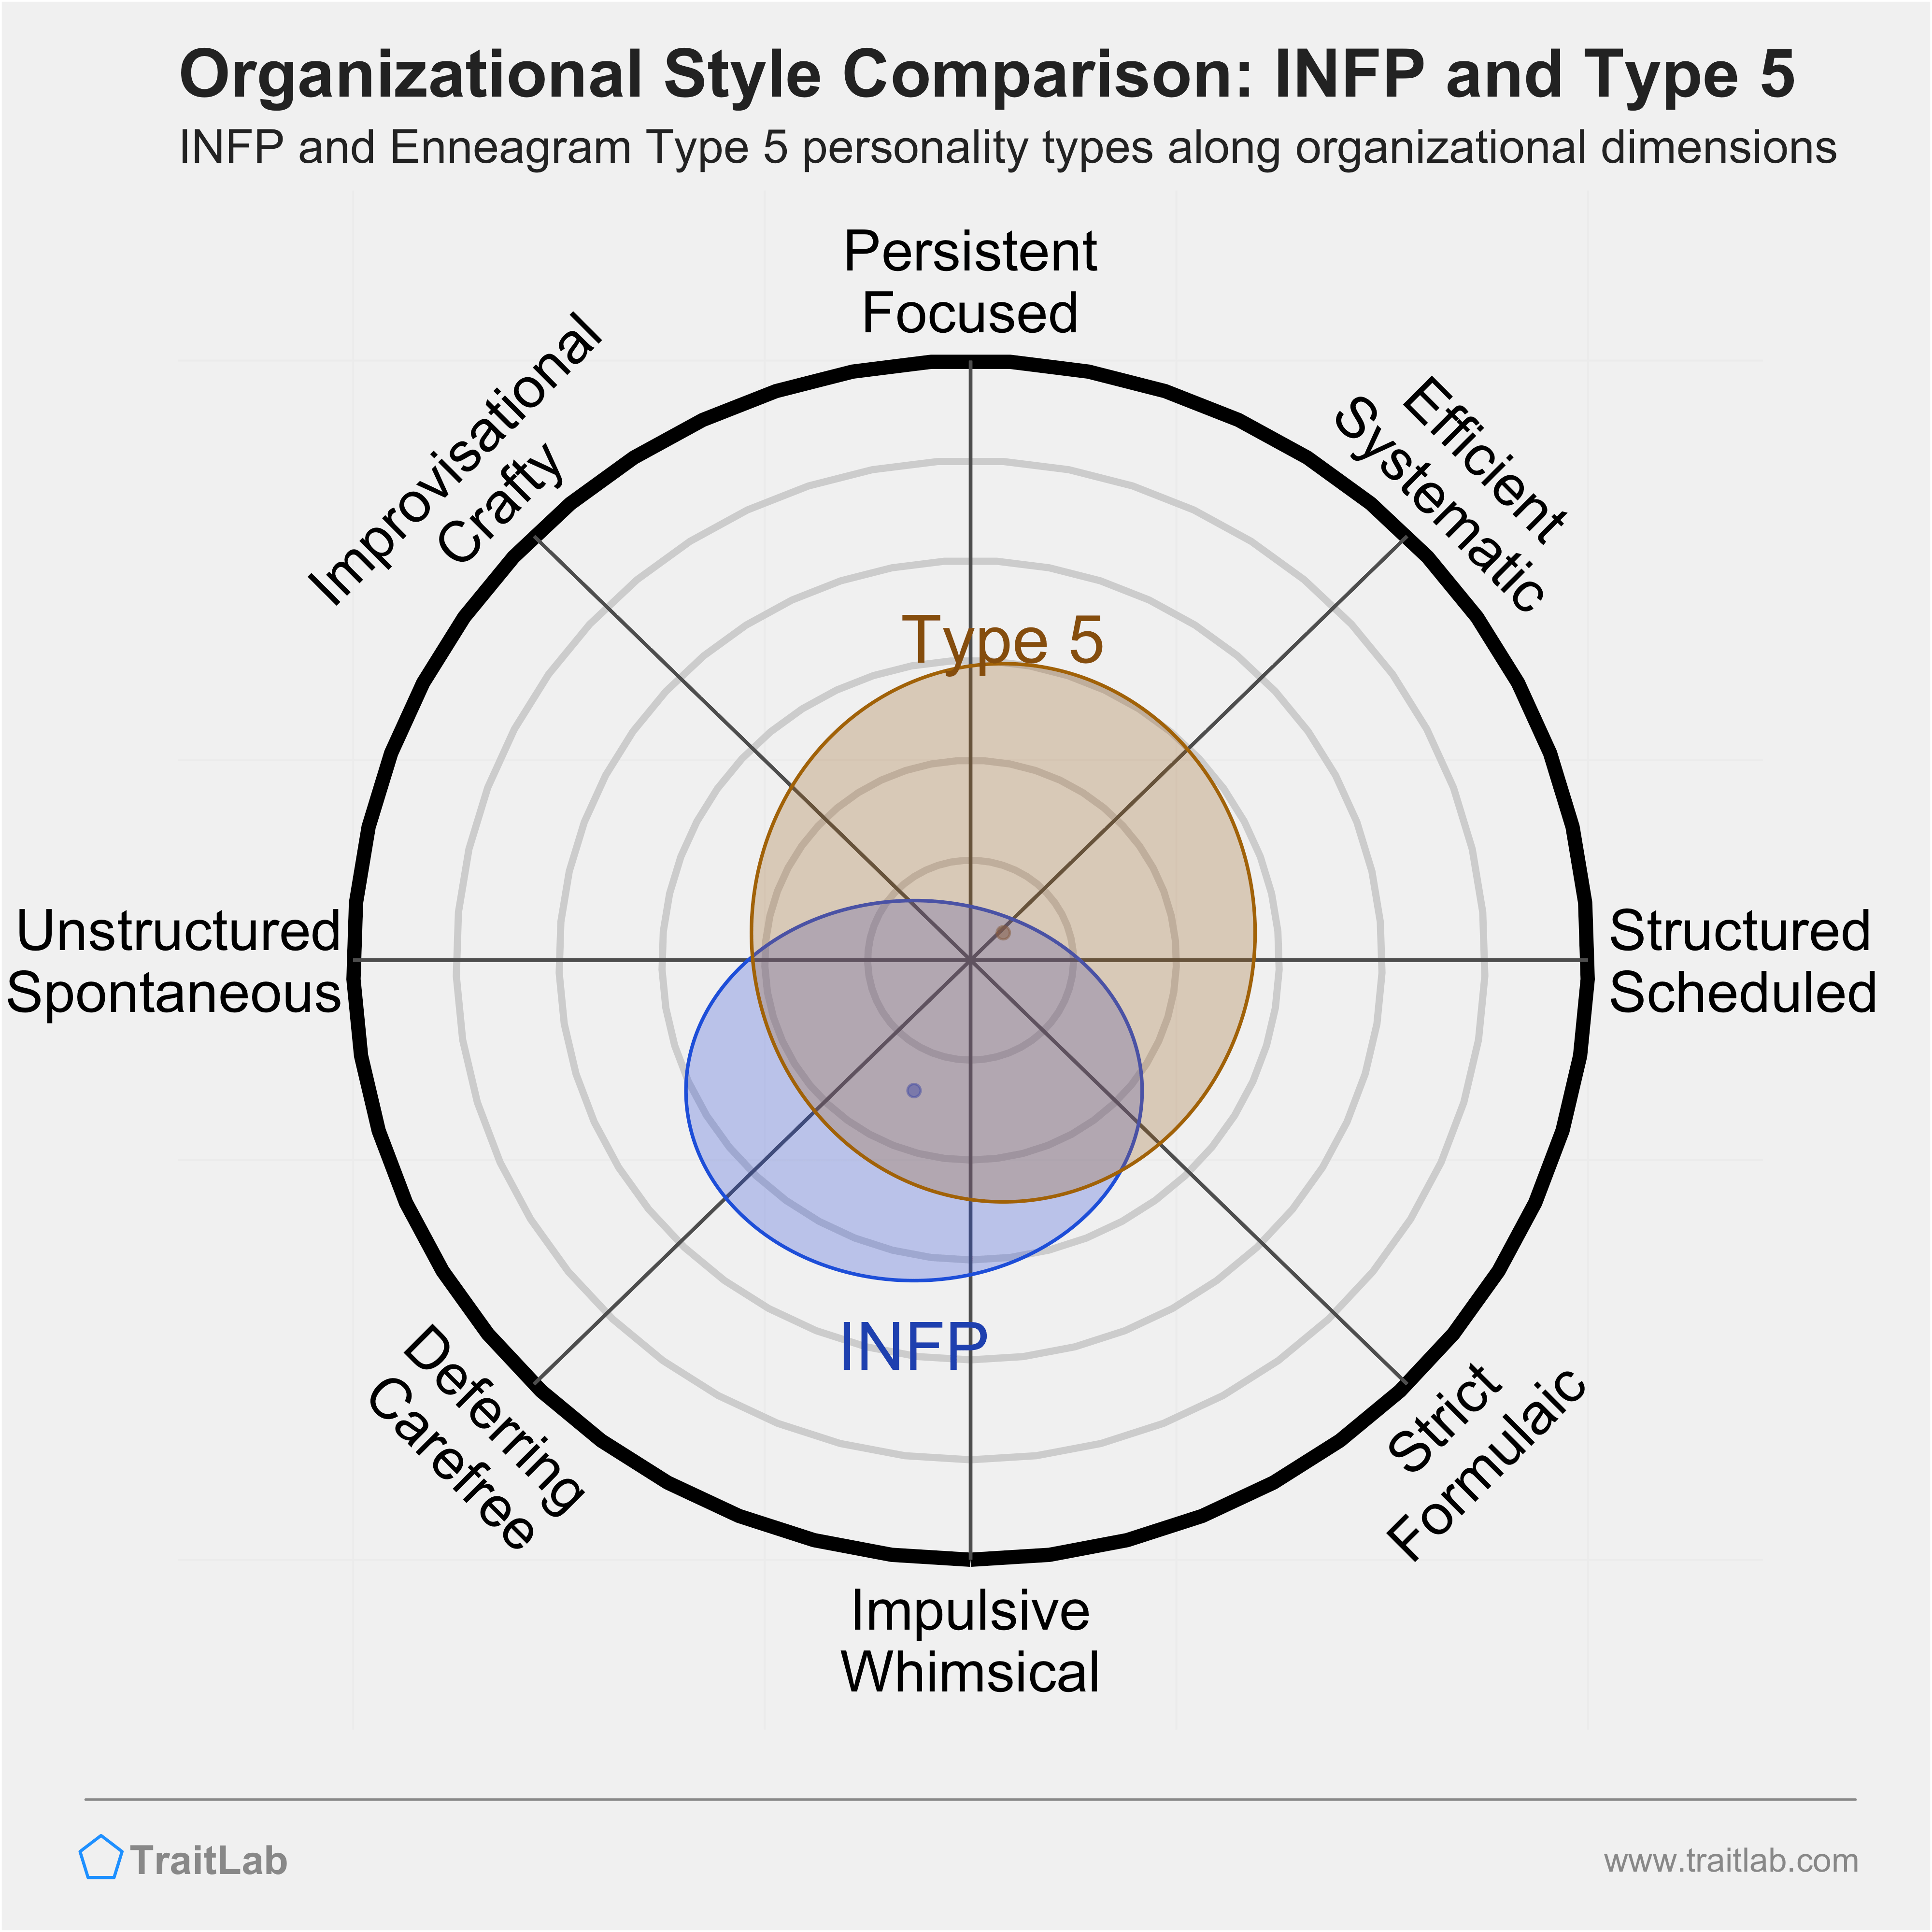 INFP and Type 5 comparison across organizational dimensions